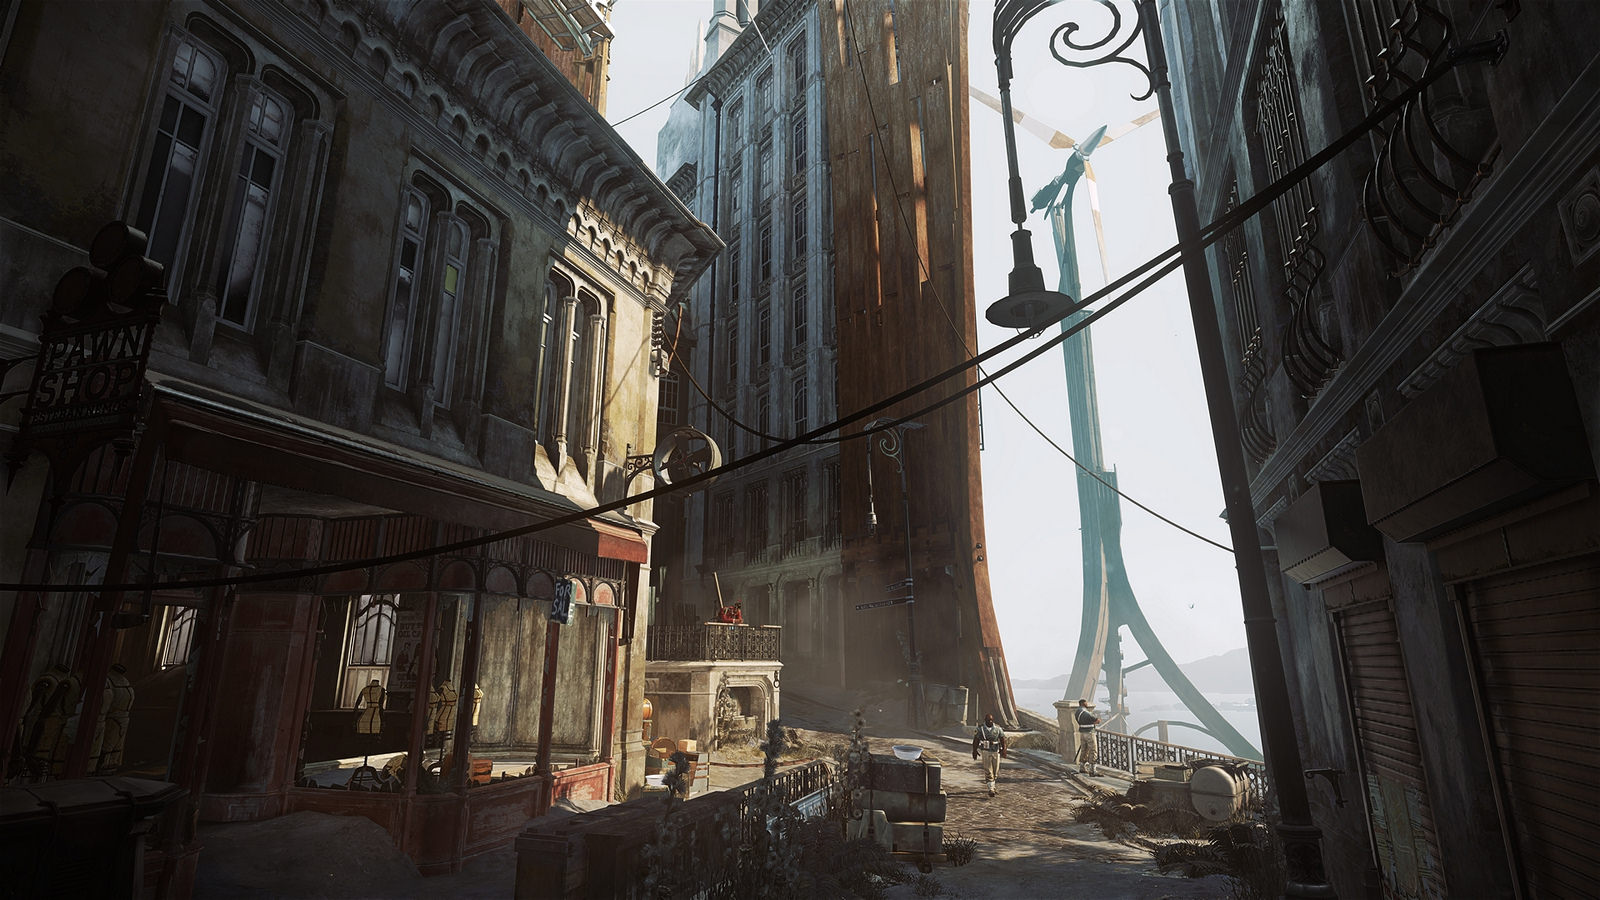 Dishonored 2 Guide/Walkthrough - Part I - The Wale and the City